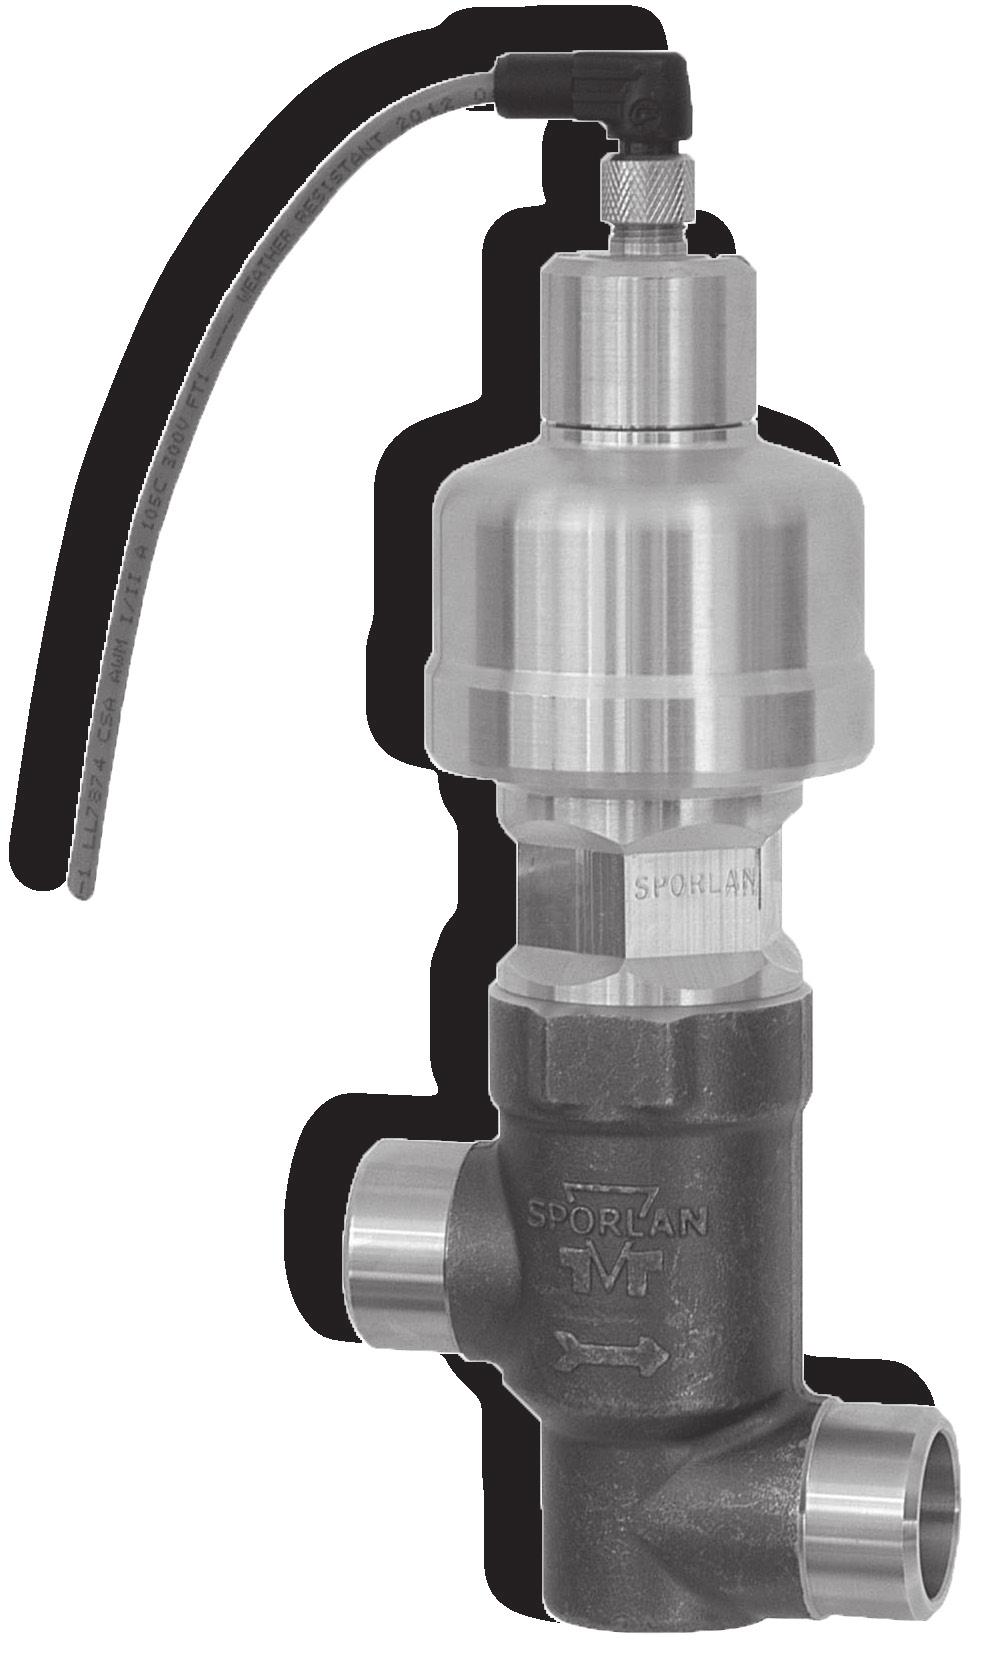 The FGB - and -70 are specifically designed to extend the capacity range of the GC family when applied as flash gas bypass valves.